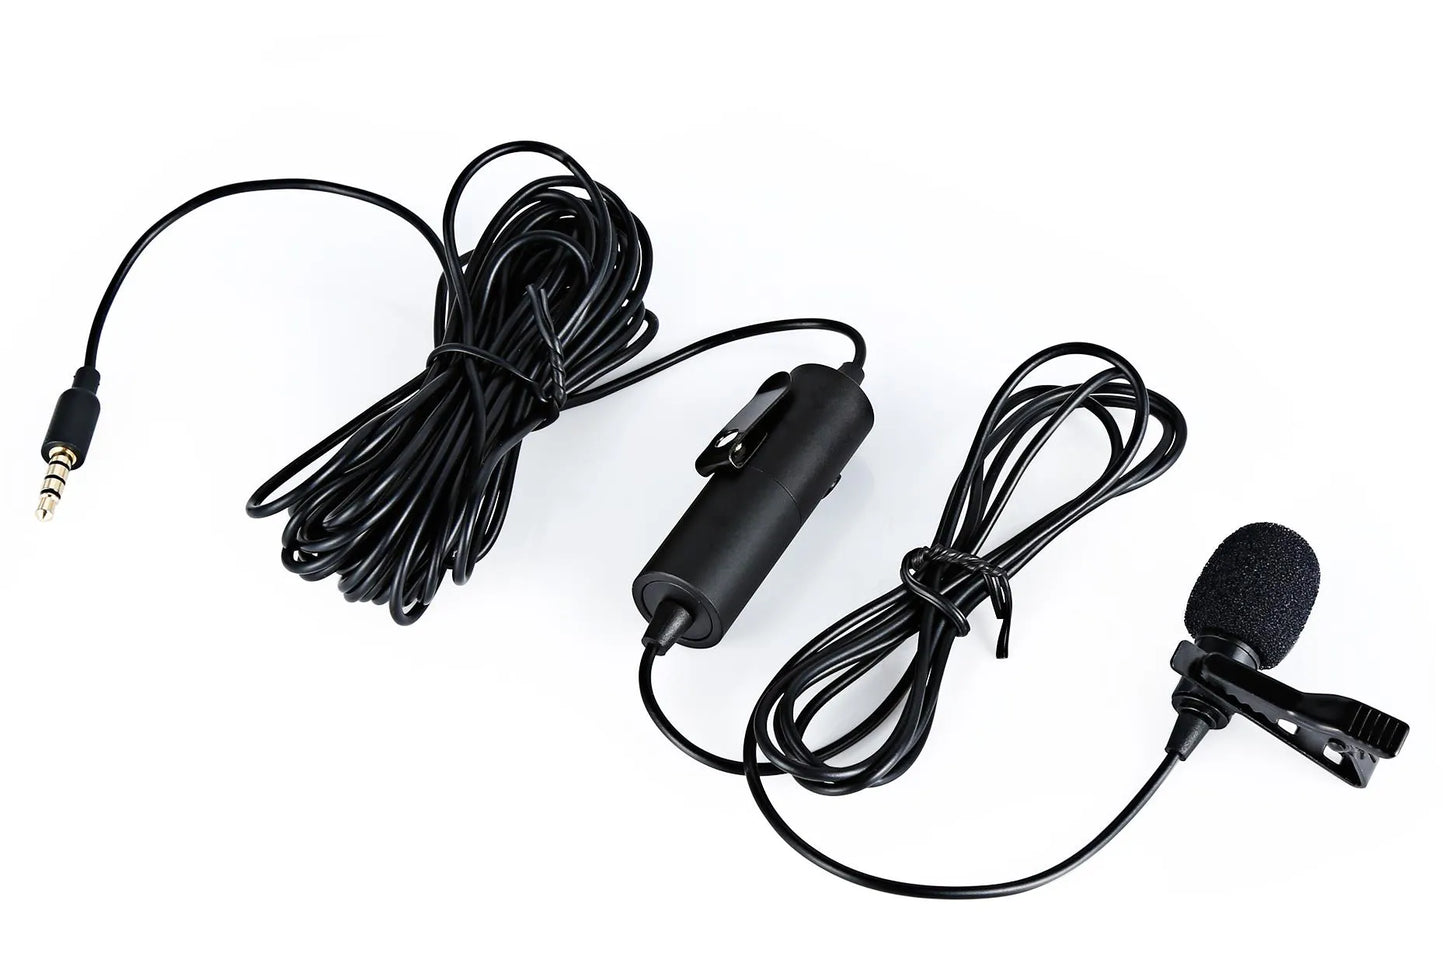 ProSound Lavalier Lapel Omnidirectional 3.5mm 4 Pole Jack Microphone with 0.25" Adapter